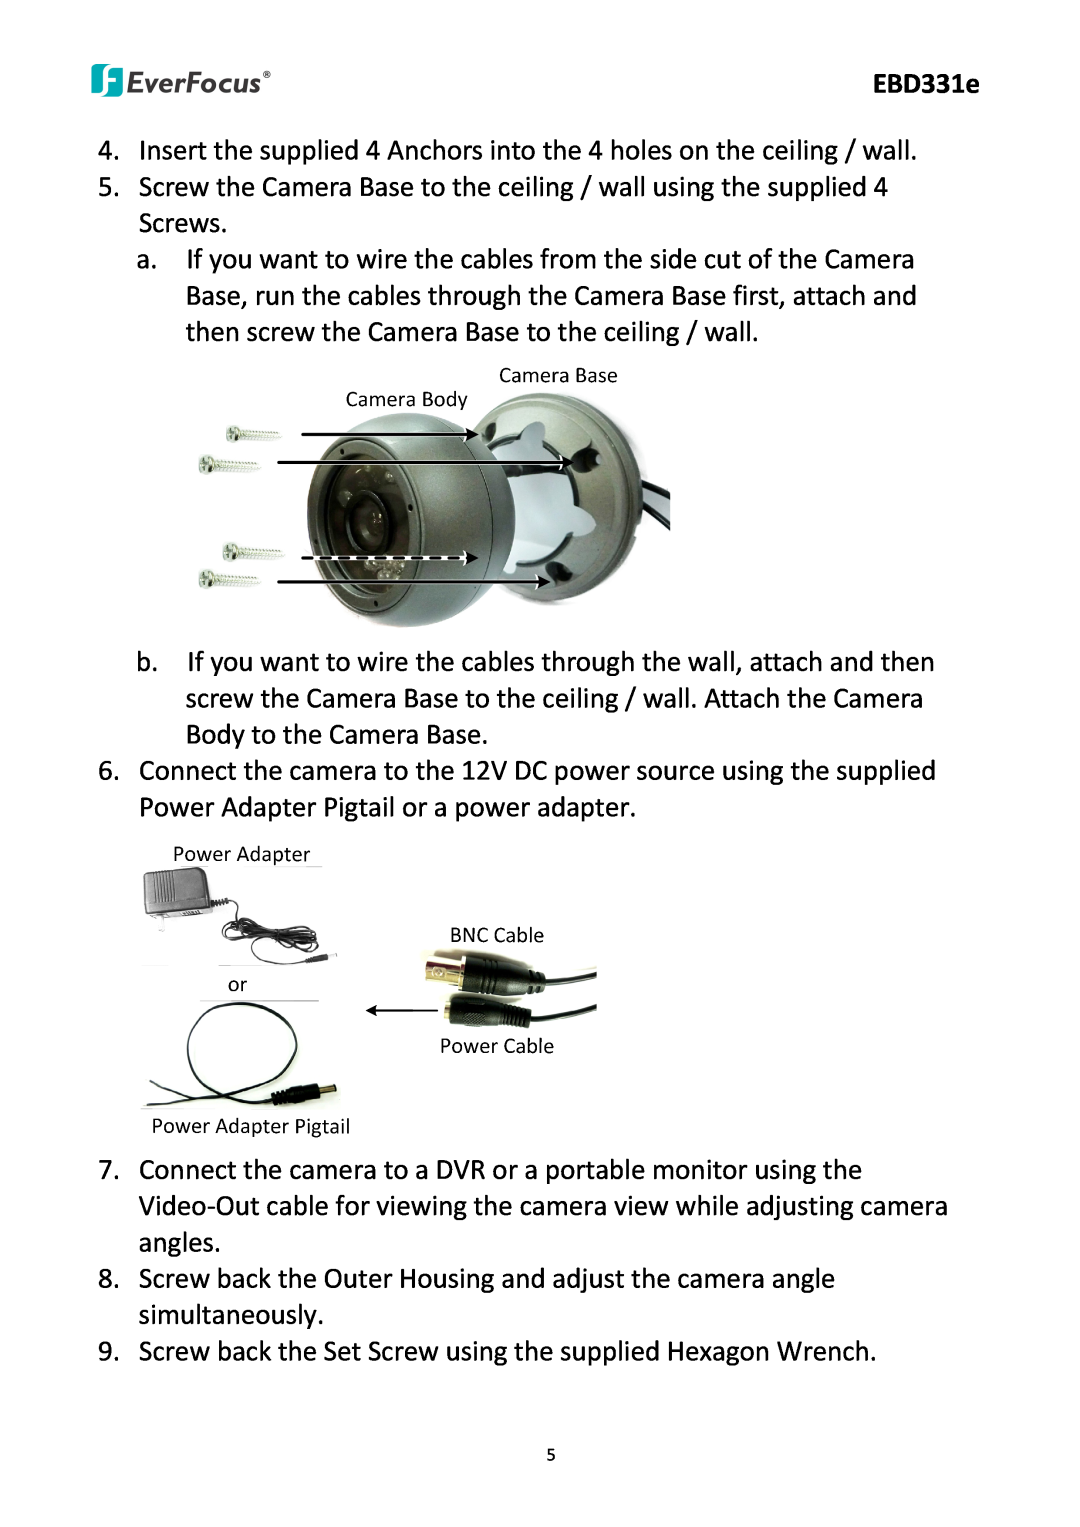 EverFocus EBD331e user manual Connect the camera to a DVR or a portable monitor using the 